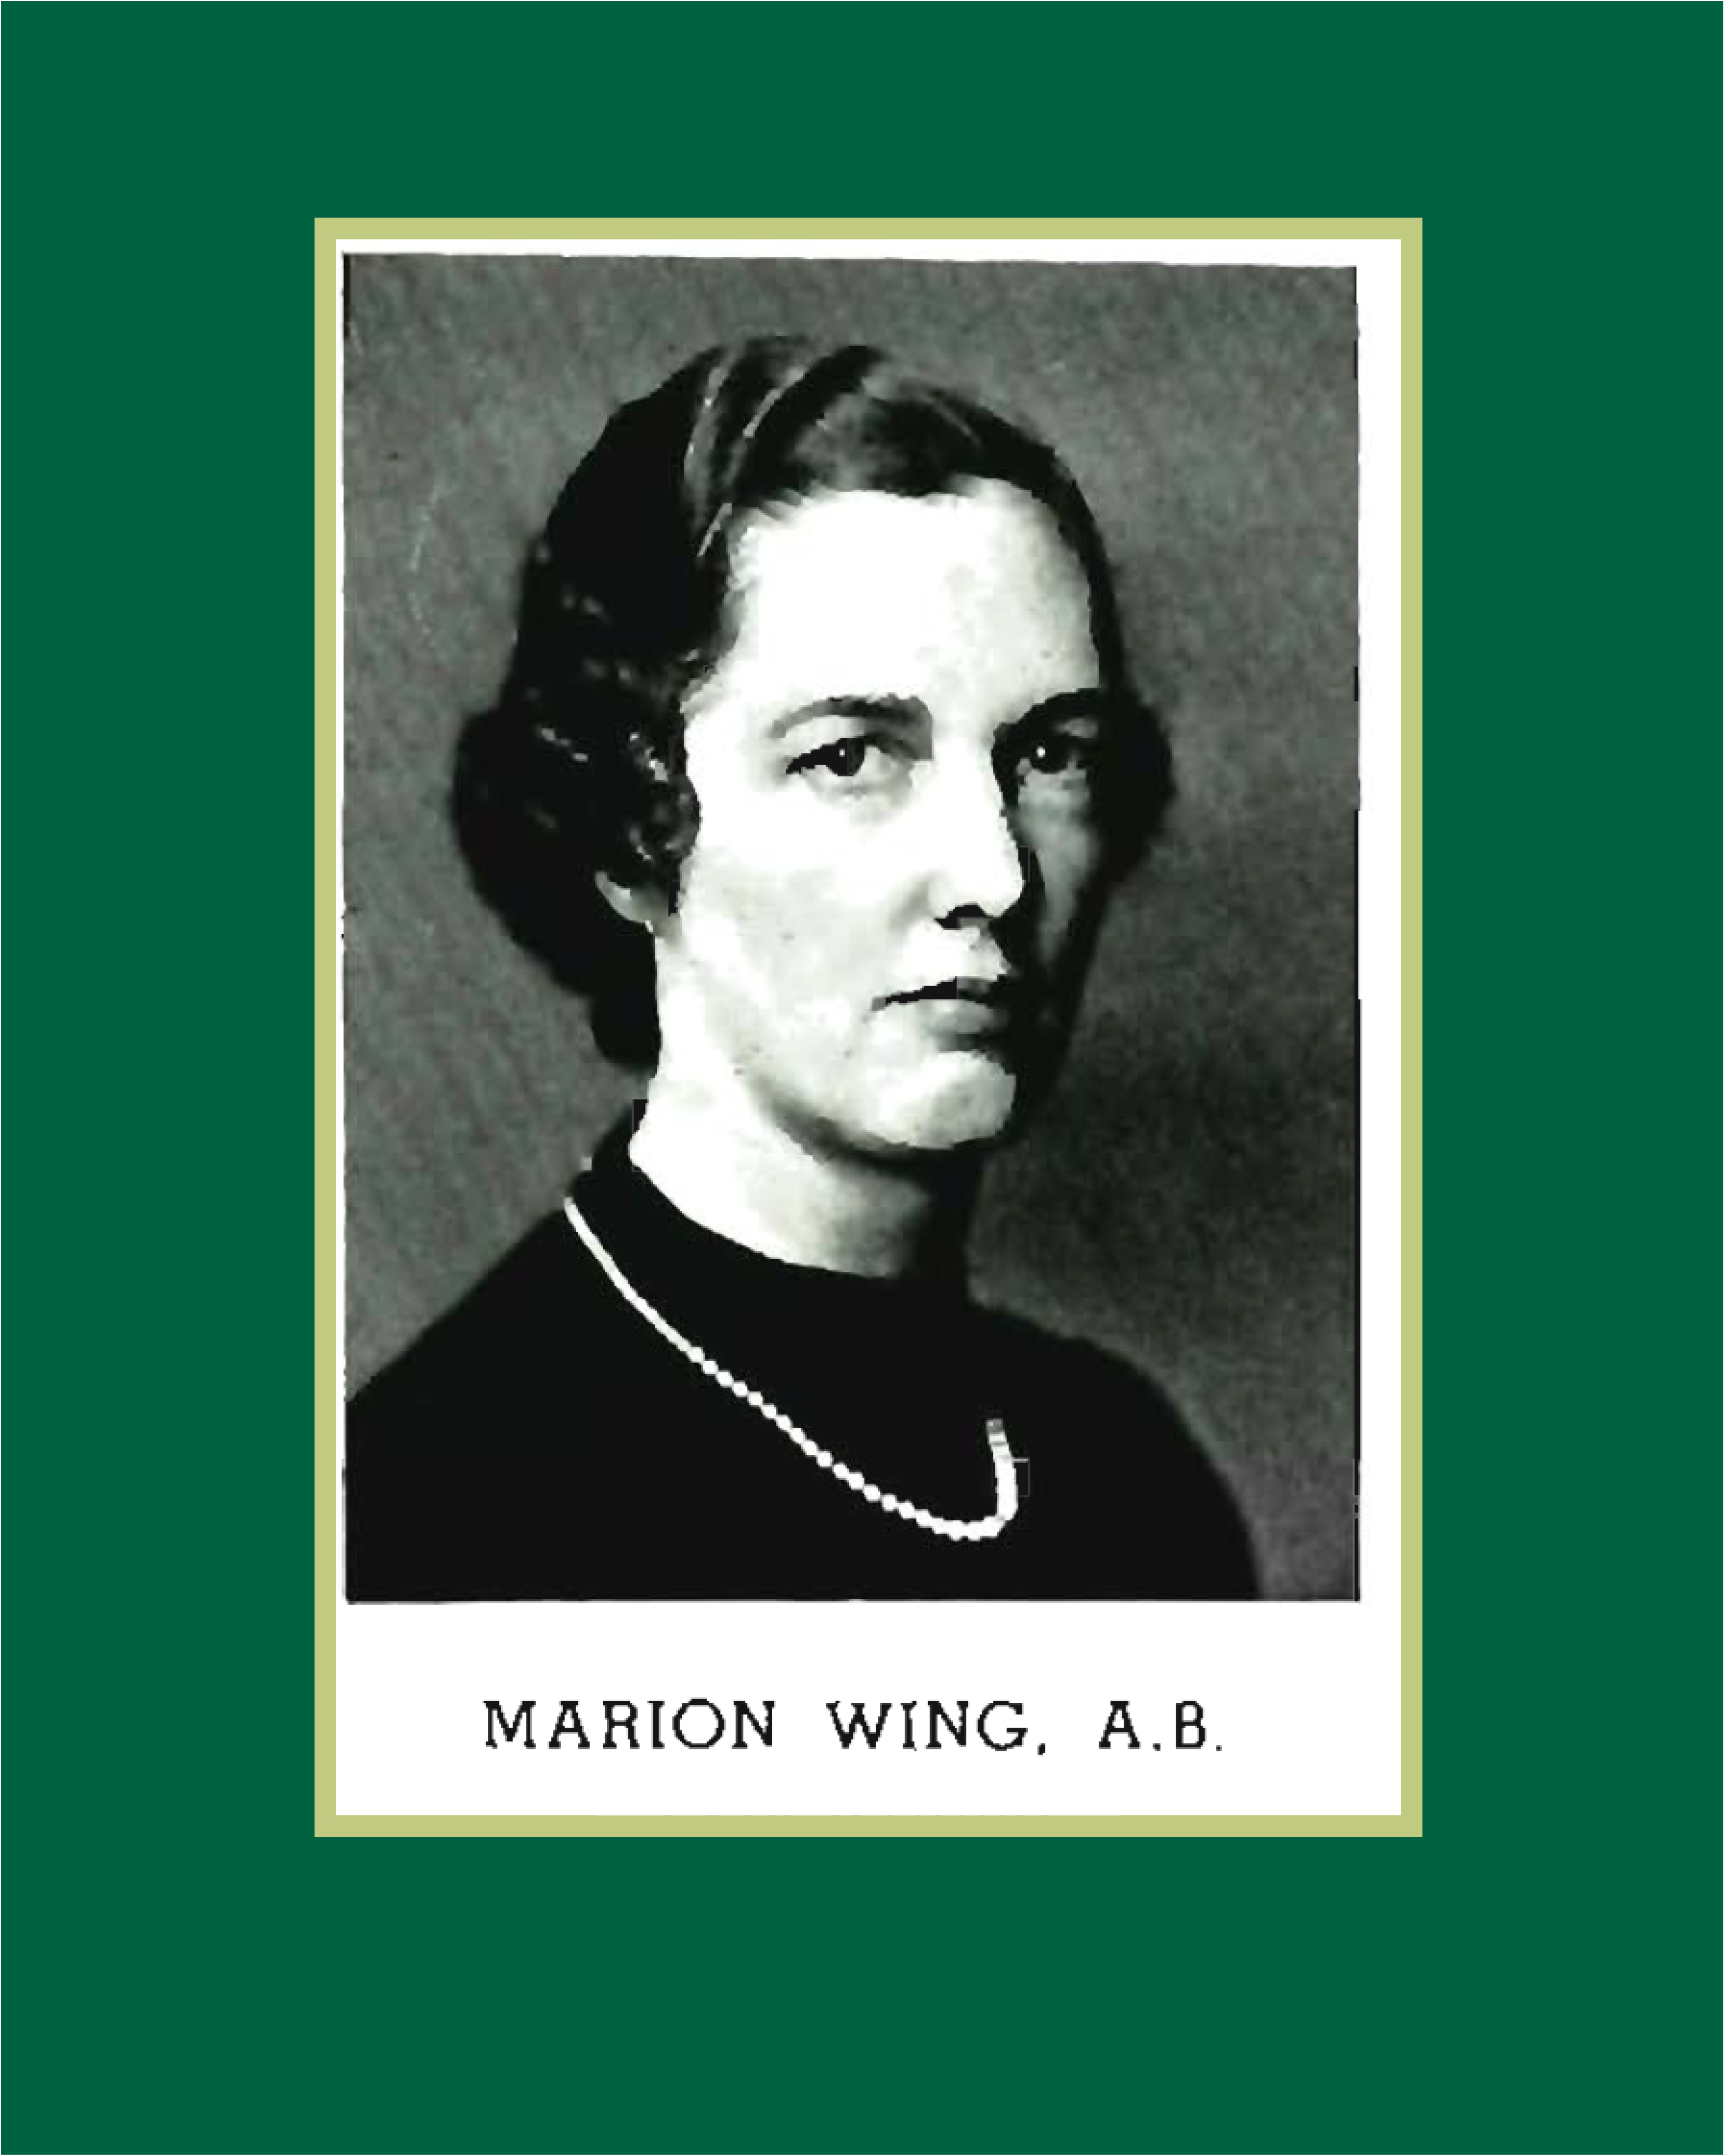 Marion Wing